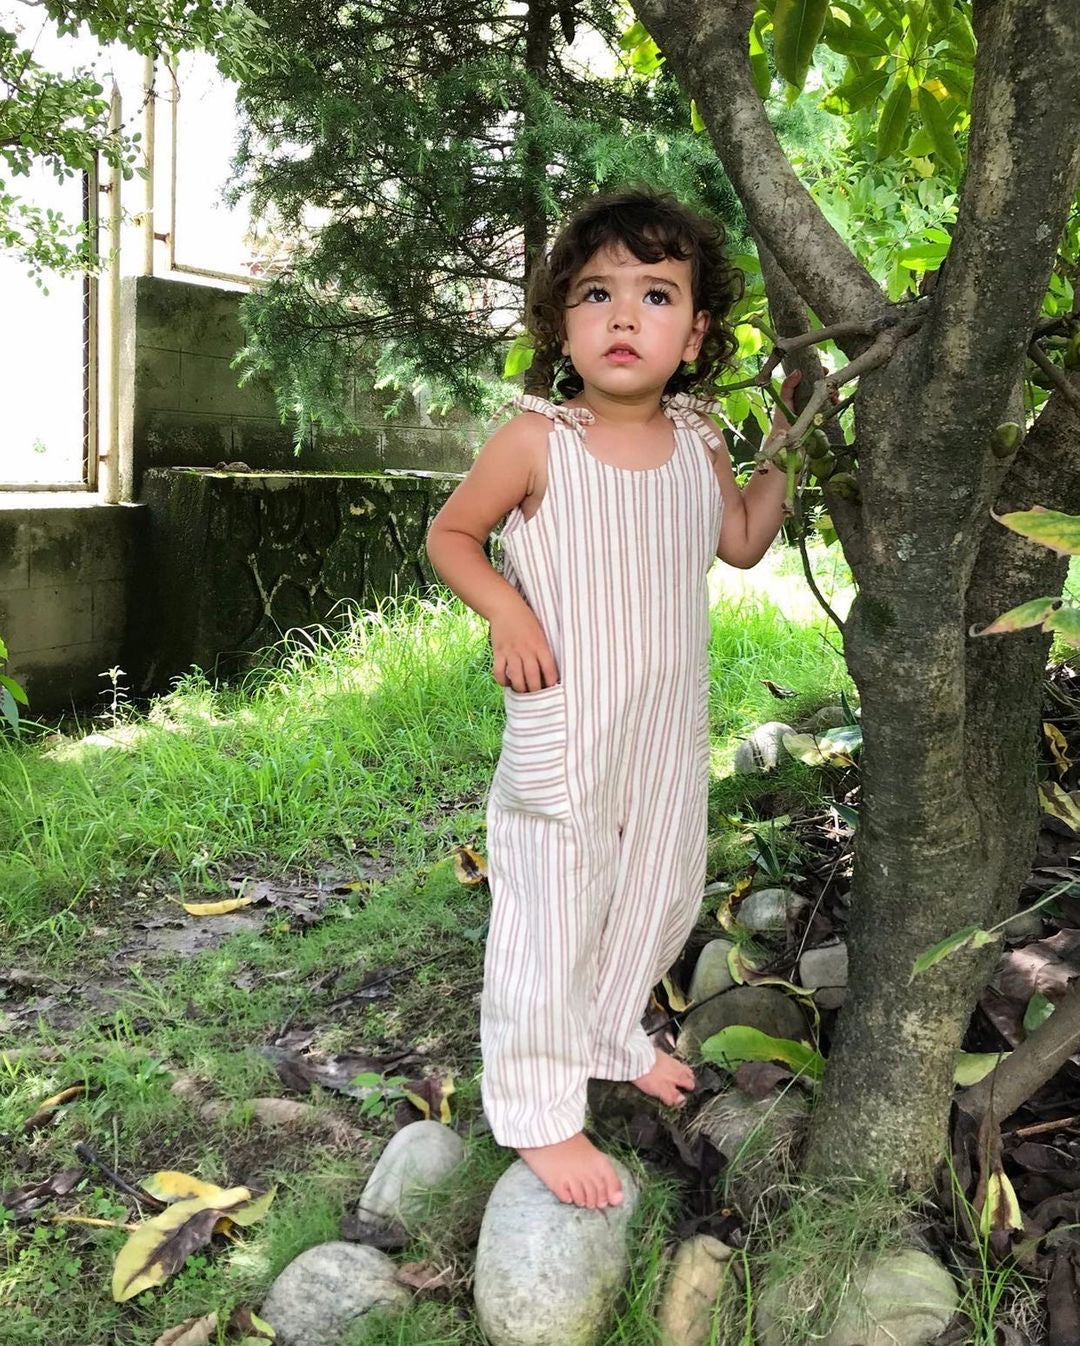 Children love soft, breathable cotton clothes! These Dungarees are made from woven fabrics which are unisex, simple yet cool to wear this summer. Our textiles are woven by inmates here in Nepal that provide an opportunity to generate income and support families back home.